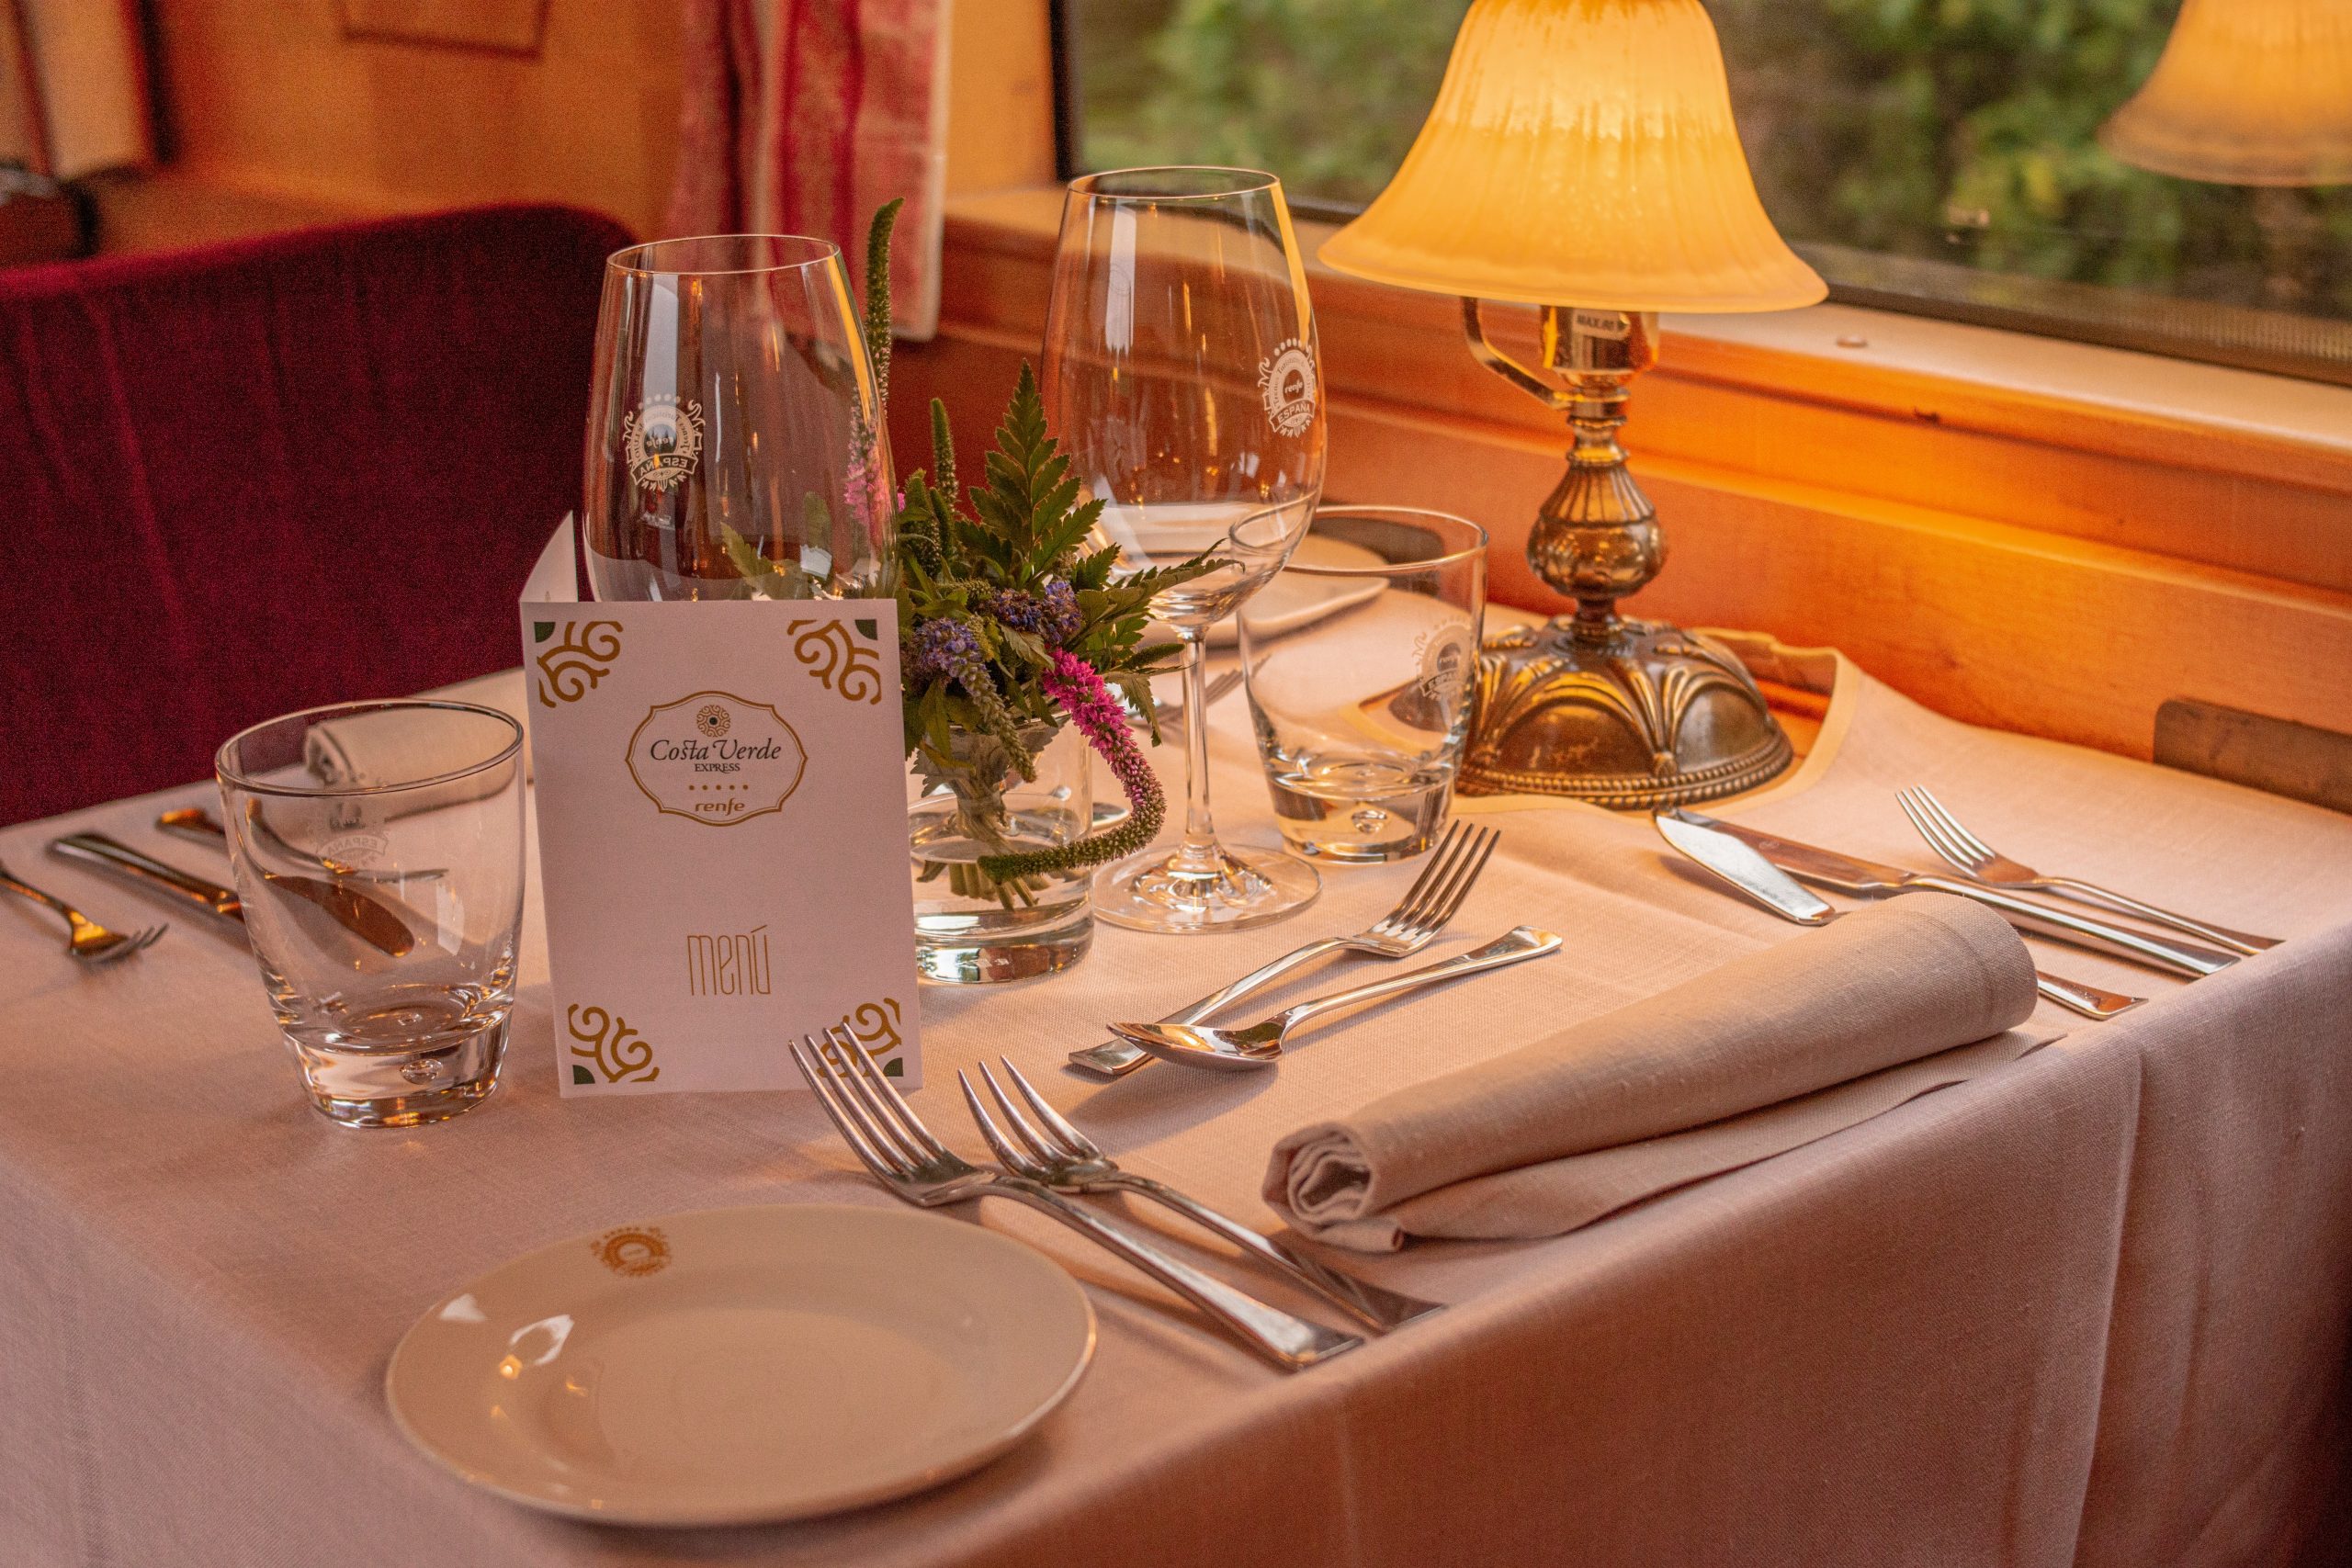 explore the epitome of luxury travel with our collection of elegant and opulent luxury trains. embark on a unique journey of indulgence and grandeur.